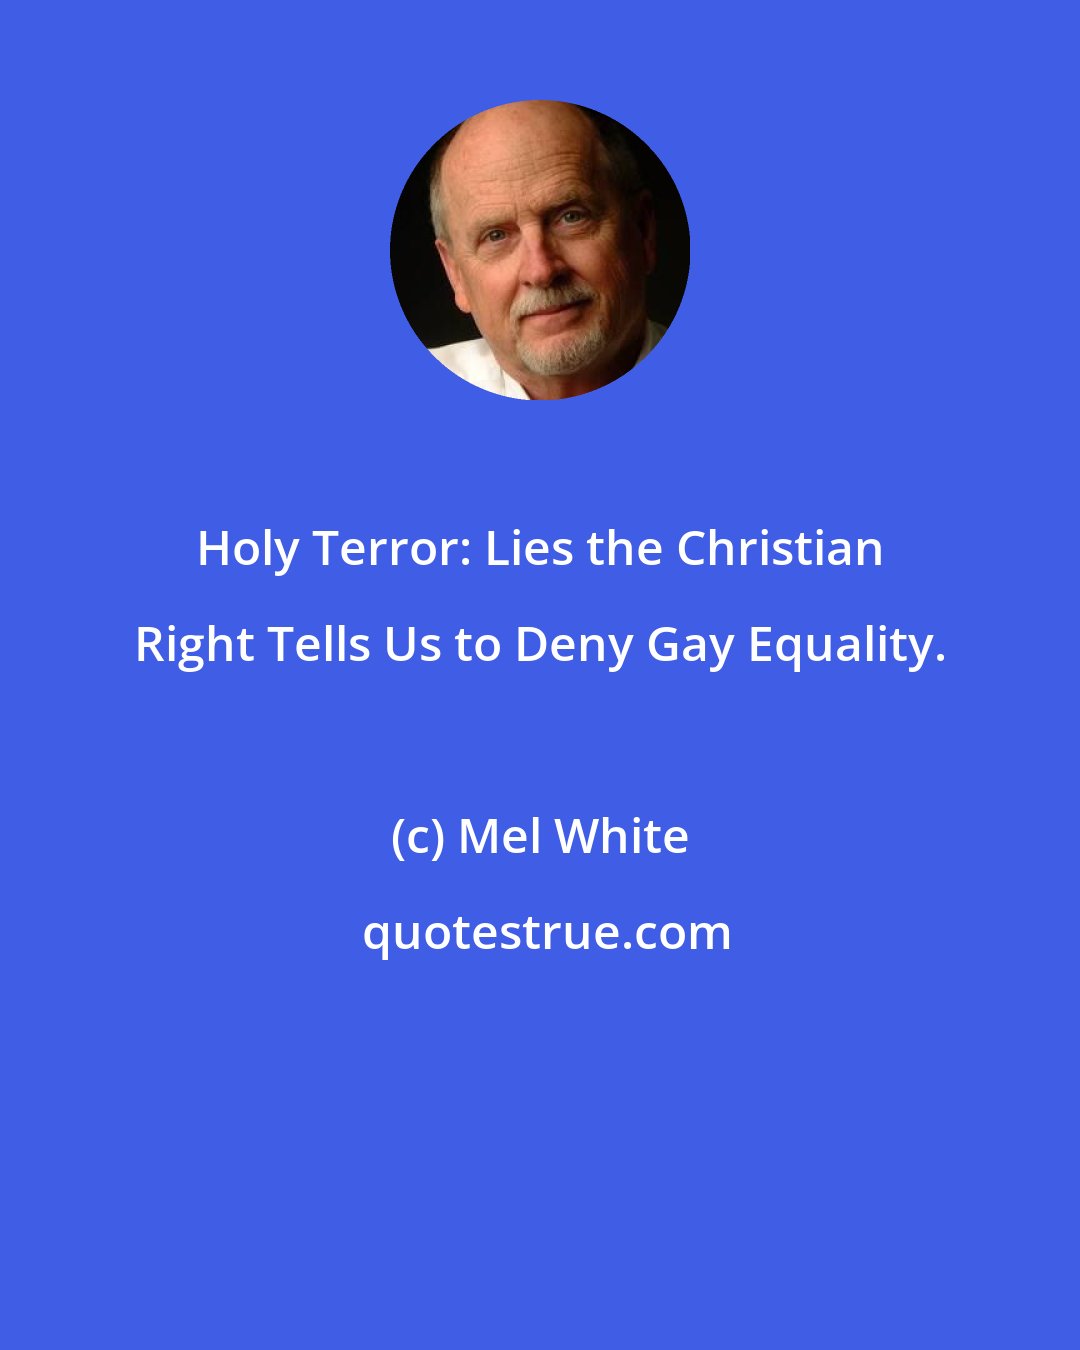 Mel White: Holy Terror: Lies the Christian Right Tells Us to Deny Gay Equality.